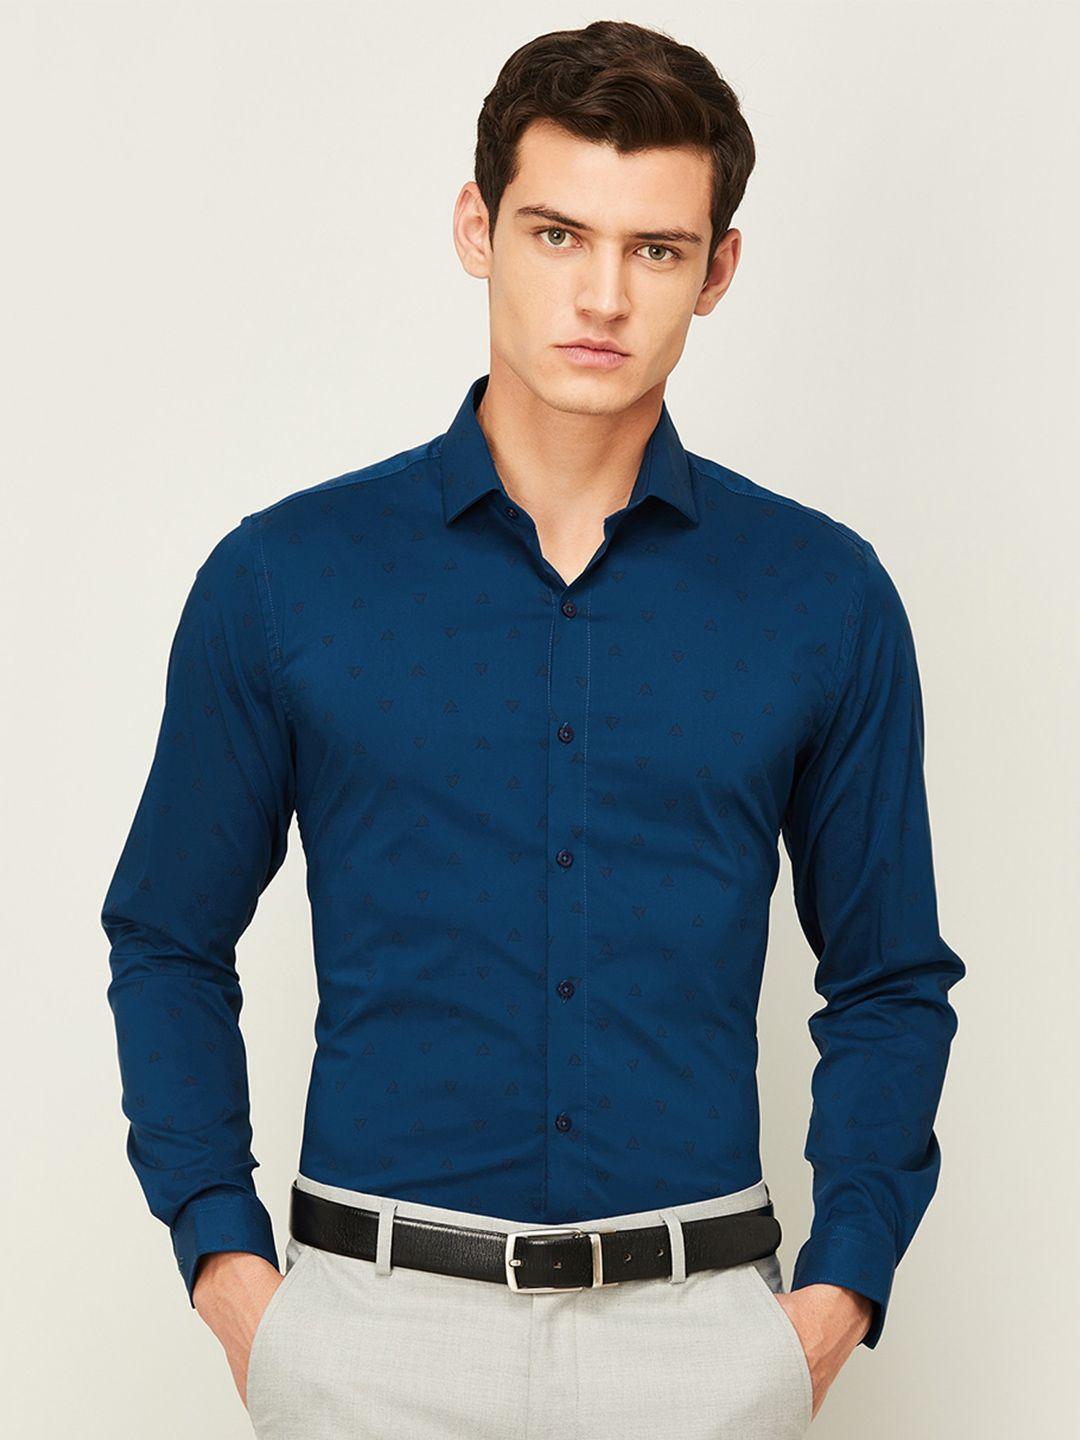 code-by-lifestyle-micro-ditsy-printed-formal-shirt